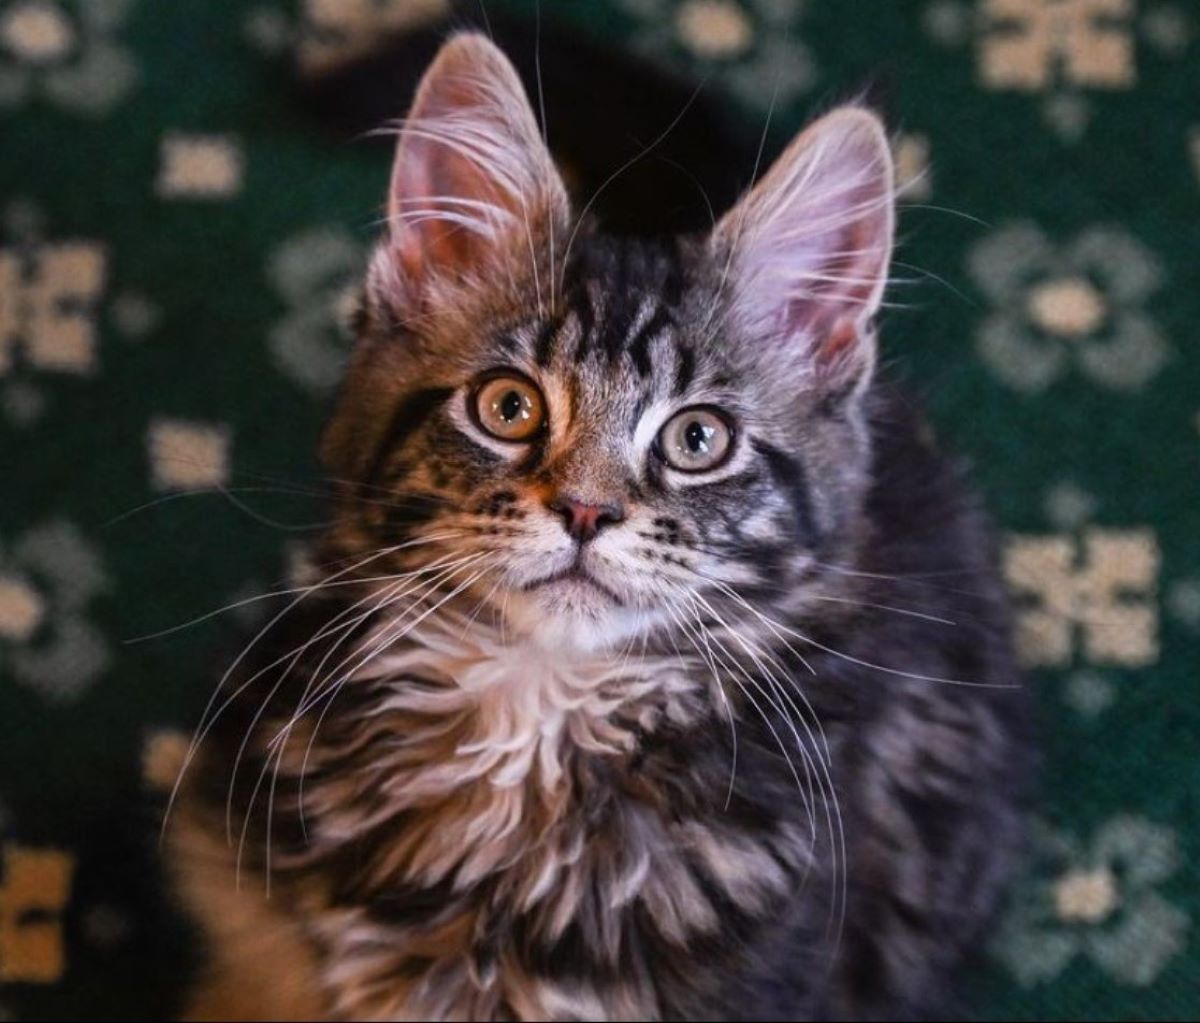 A Maine Coon kitten looks up at camera.